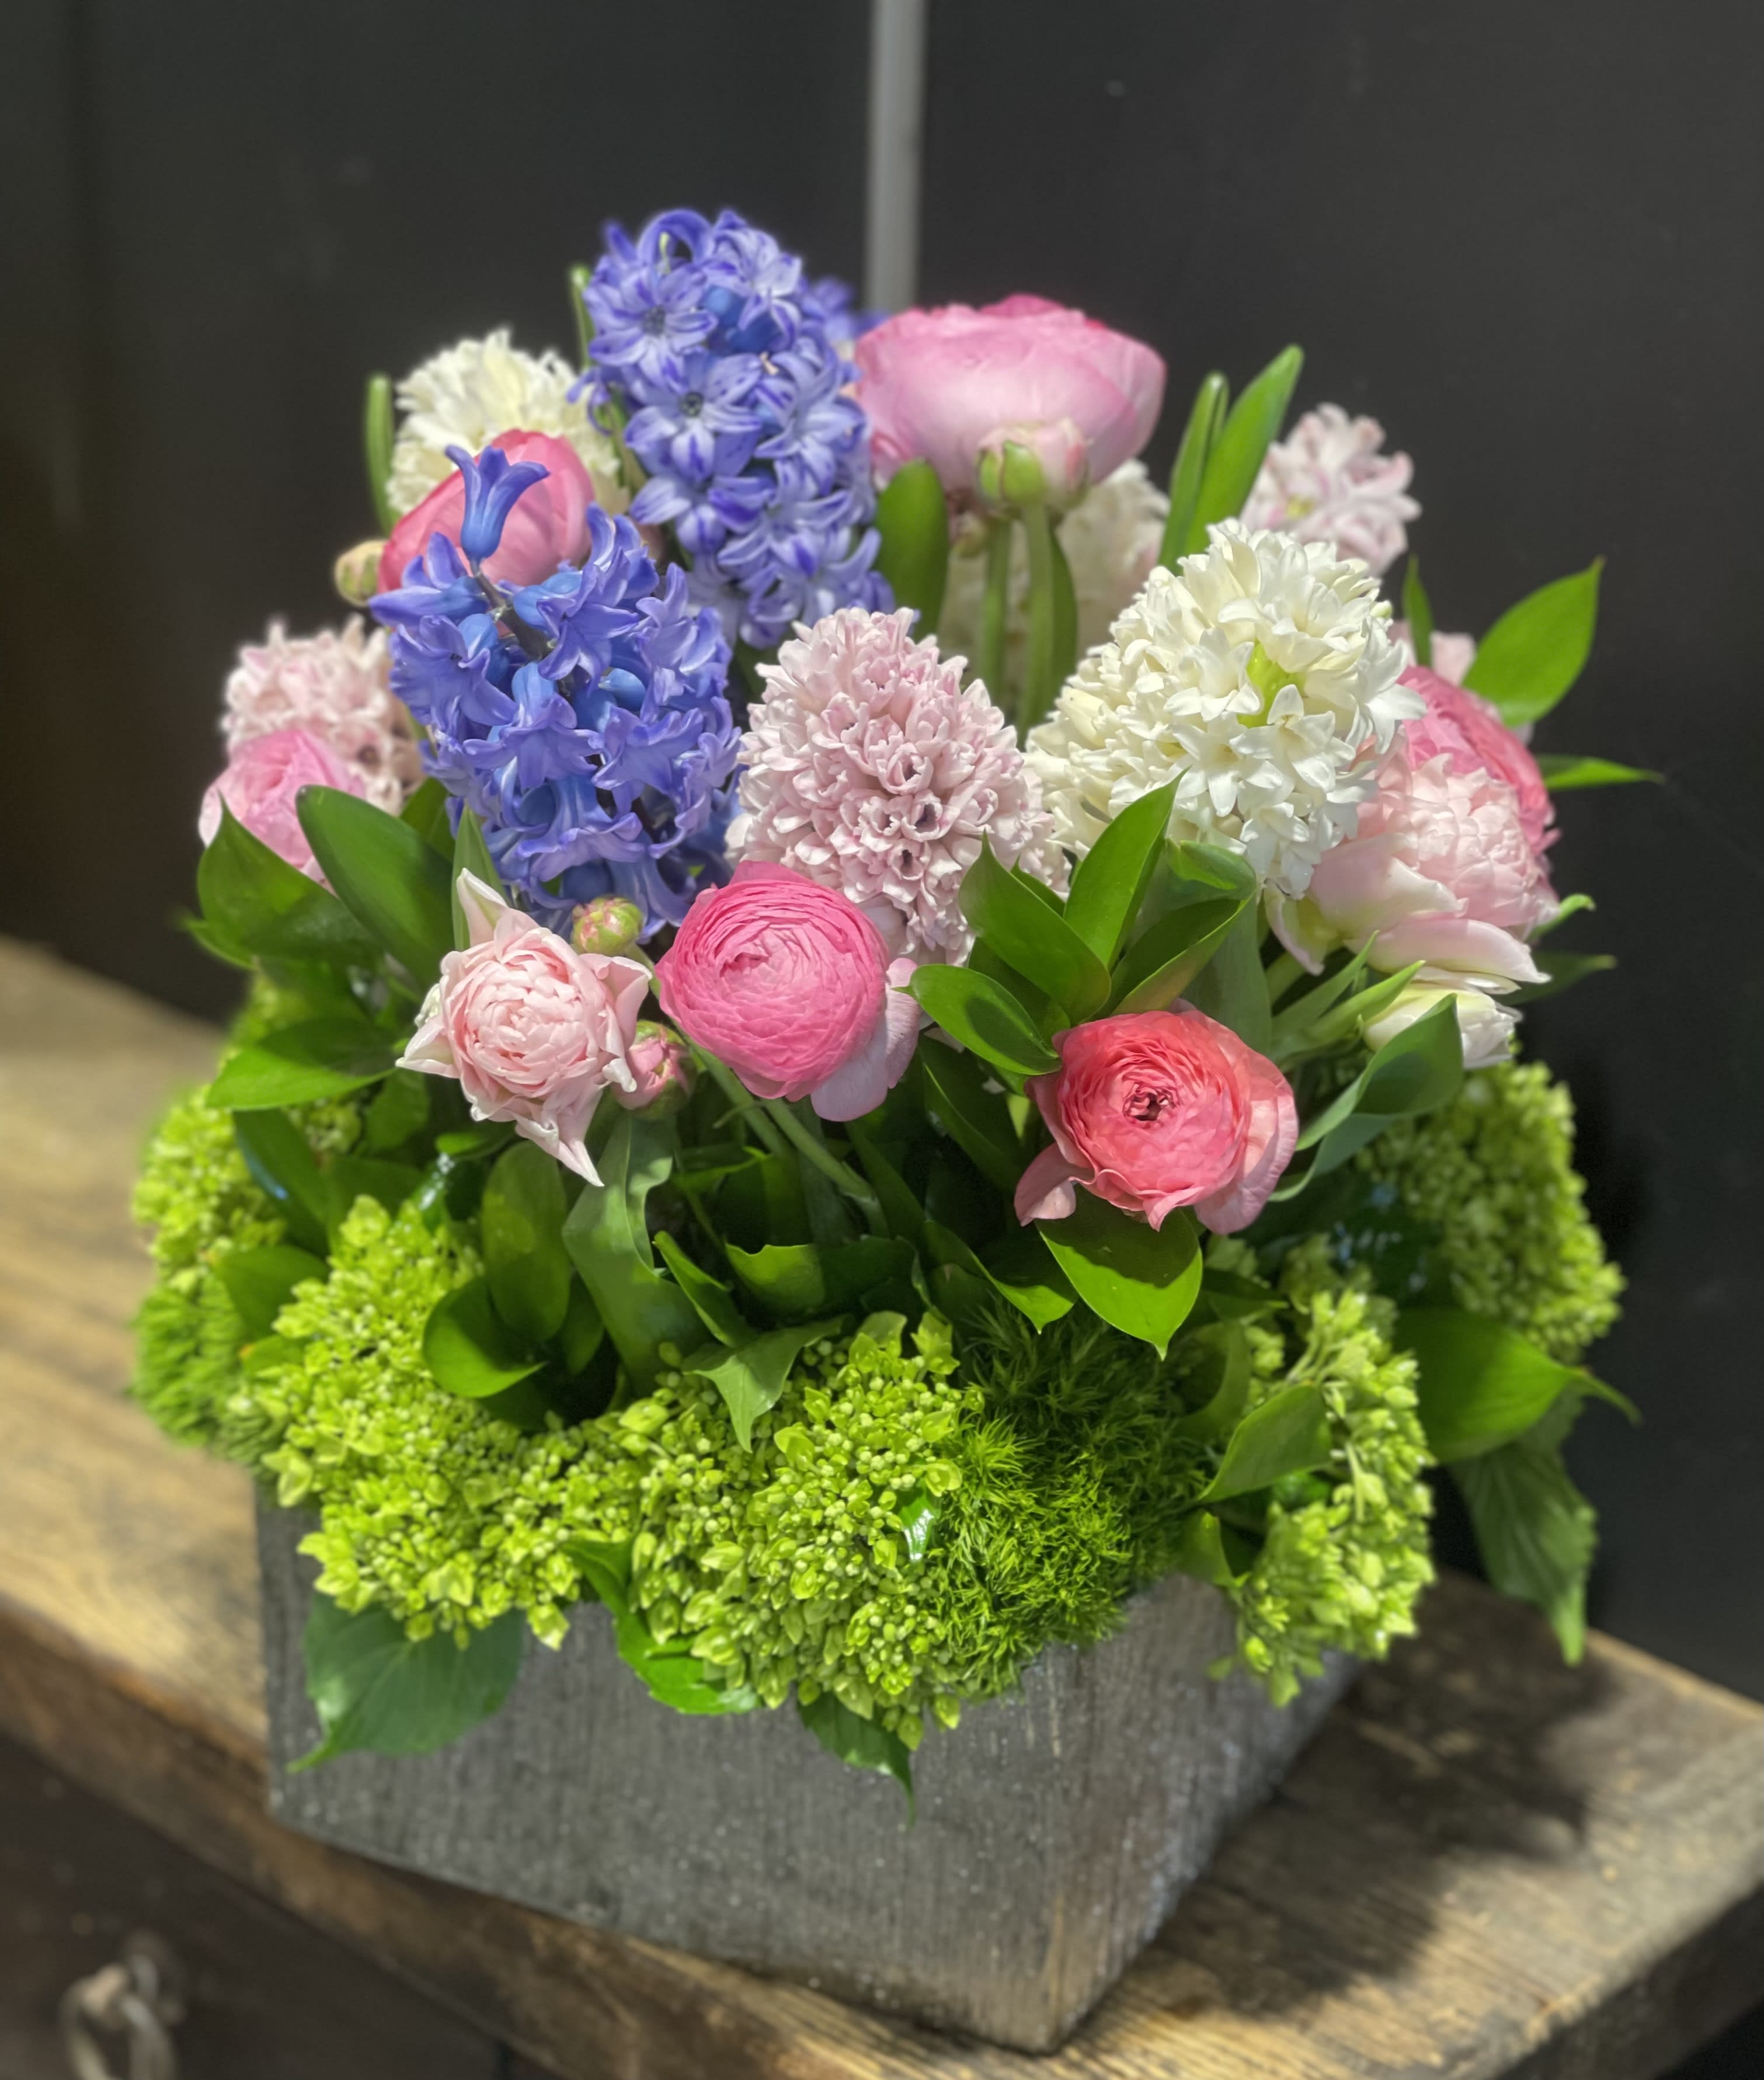 Fragrance - Beautiful combination of Spring flowers like Hyacinth, Tulips, Ranunculus with green mini Hydrangeas in a square container.